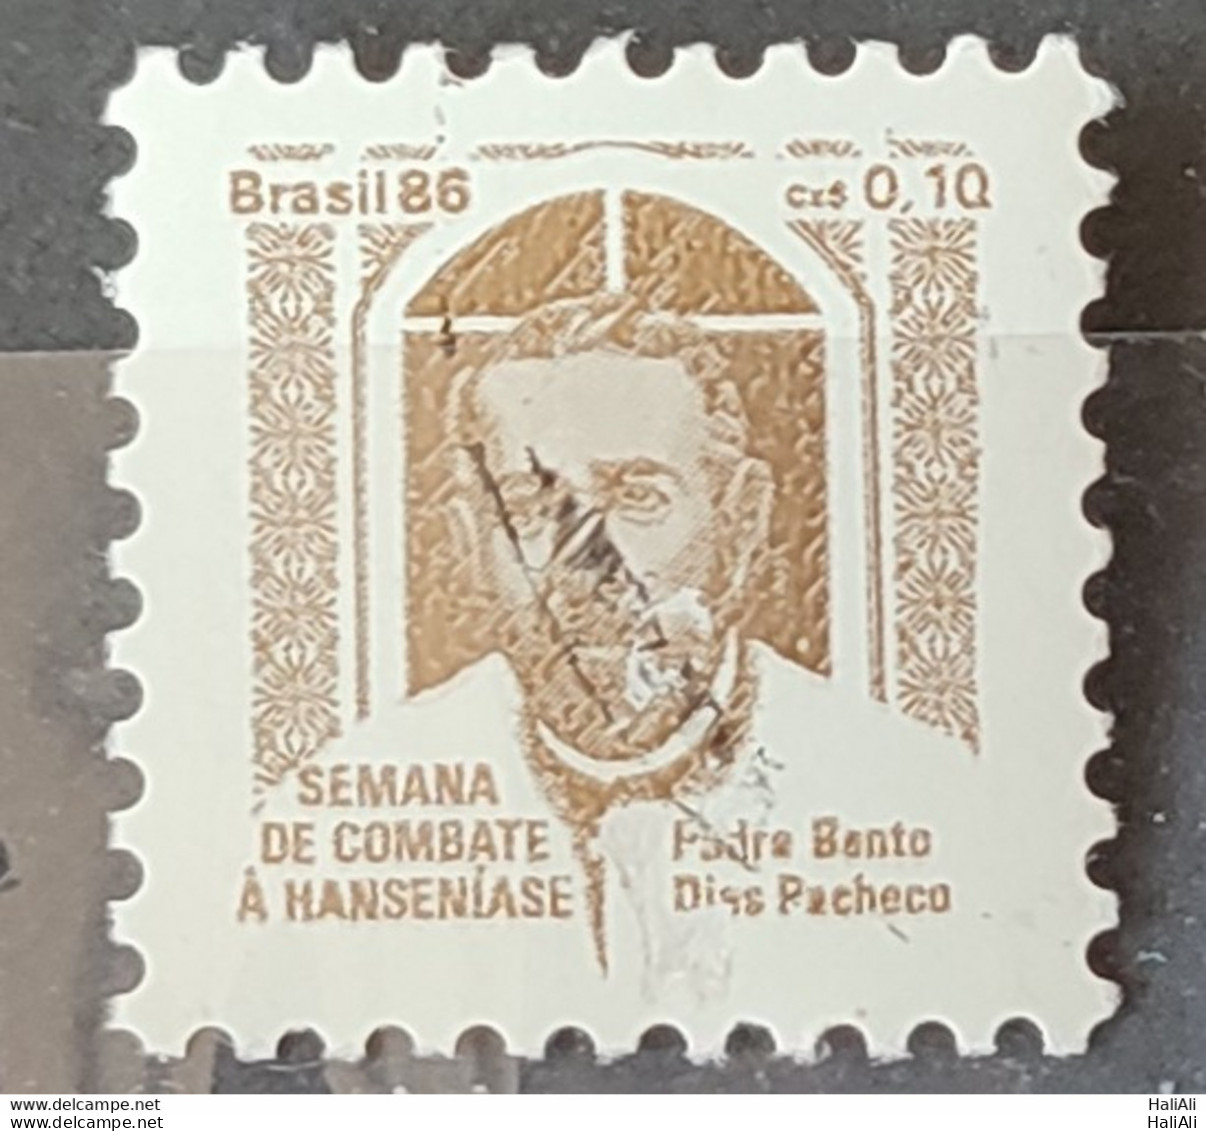 C 1538 Brazil Stamp Combat Against Hansen Hanseniasse Health Father Bento Religion 1986 H23 Circulated 1.jpg - Used Stamps